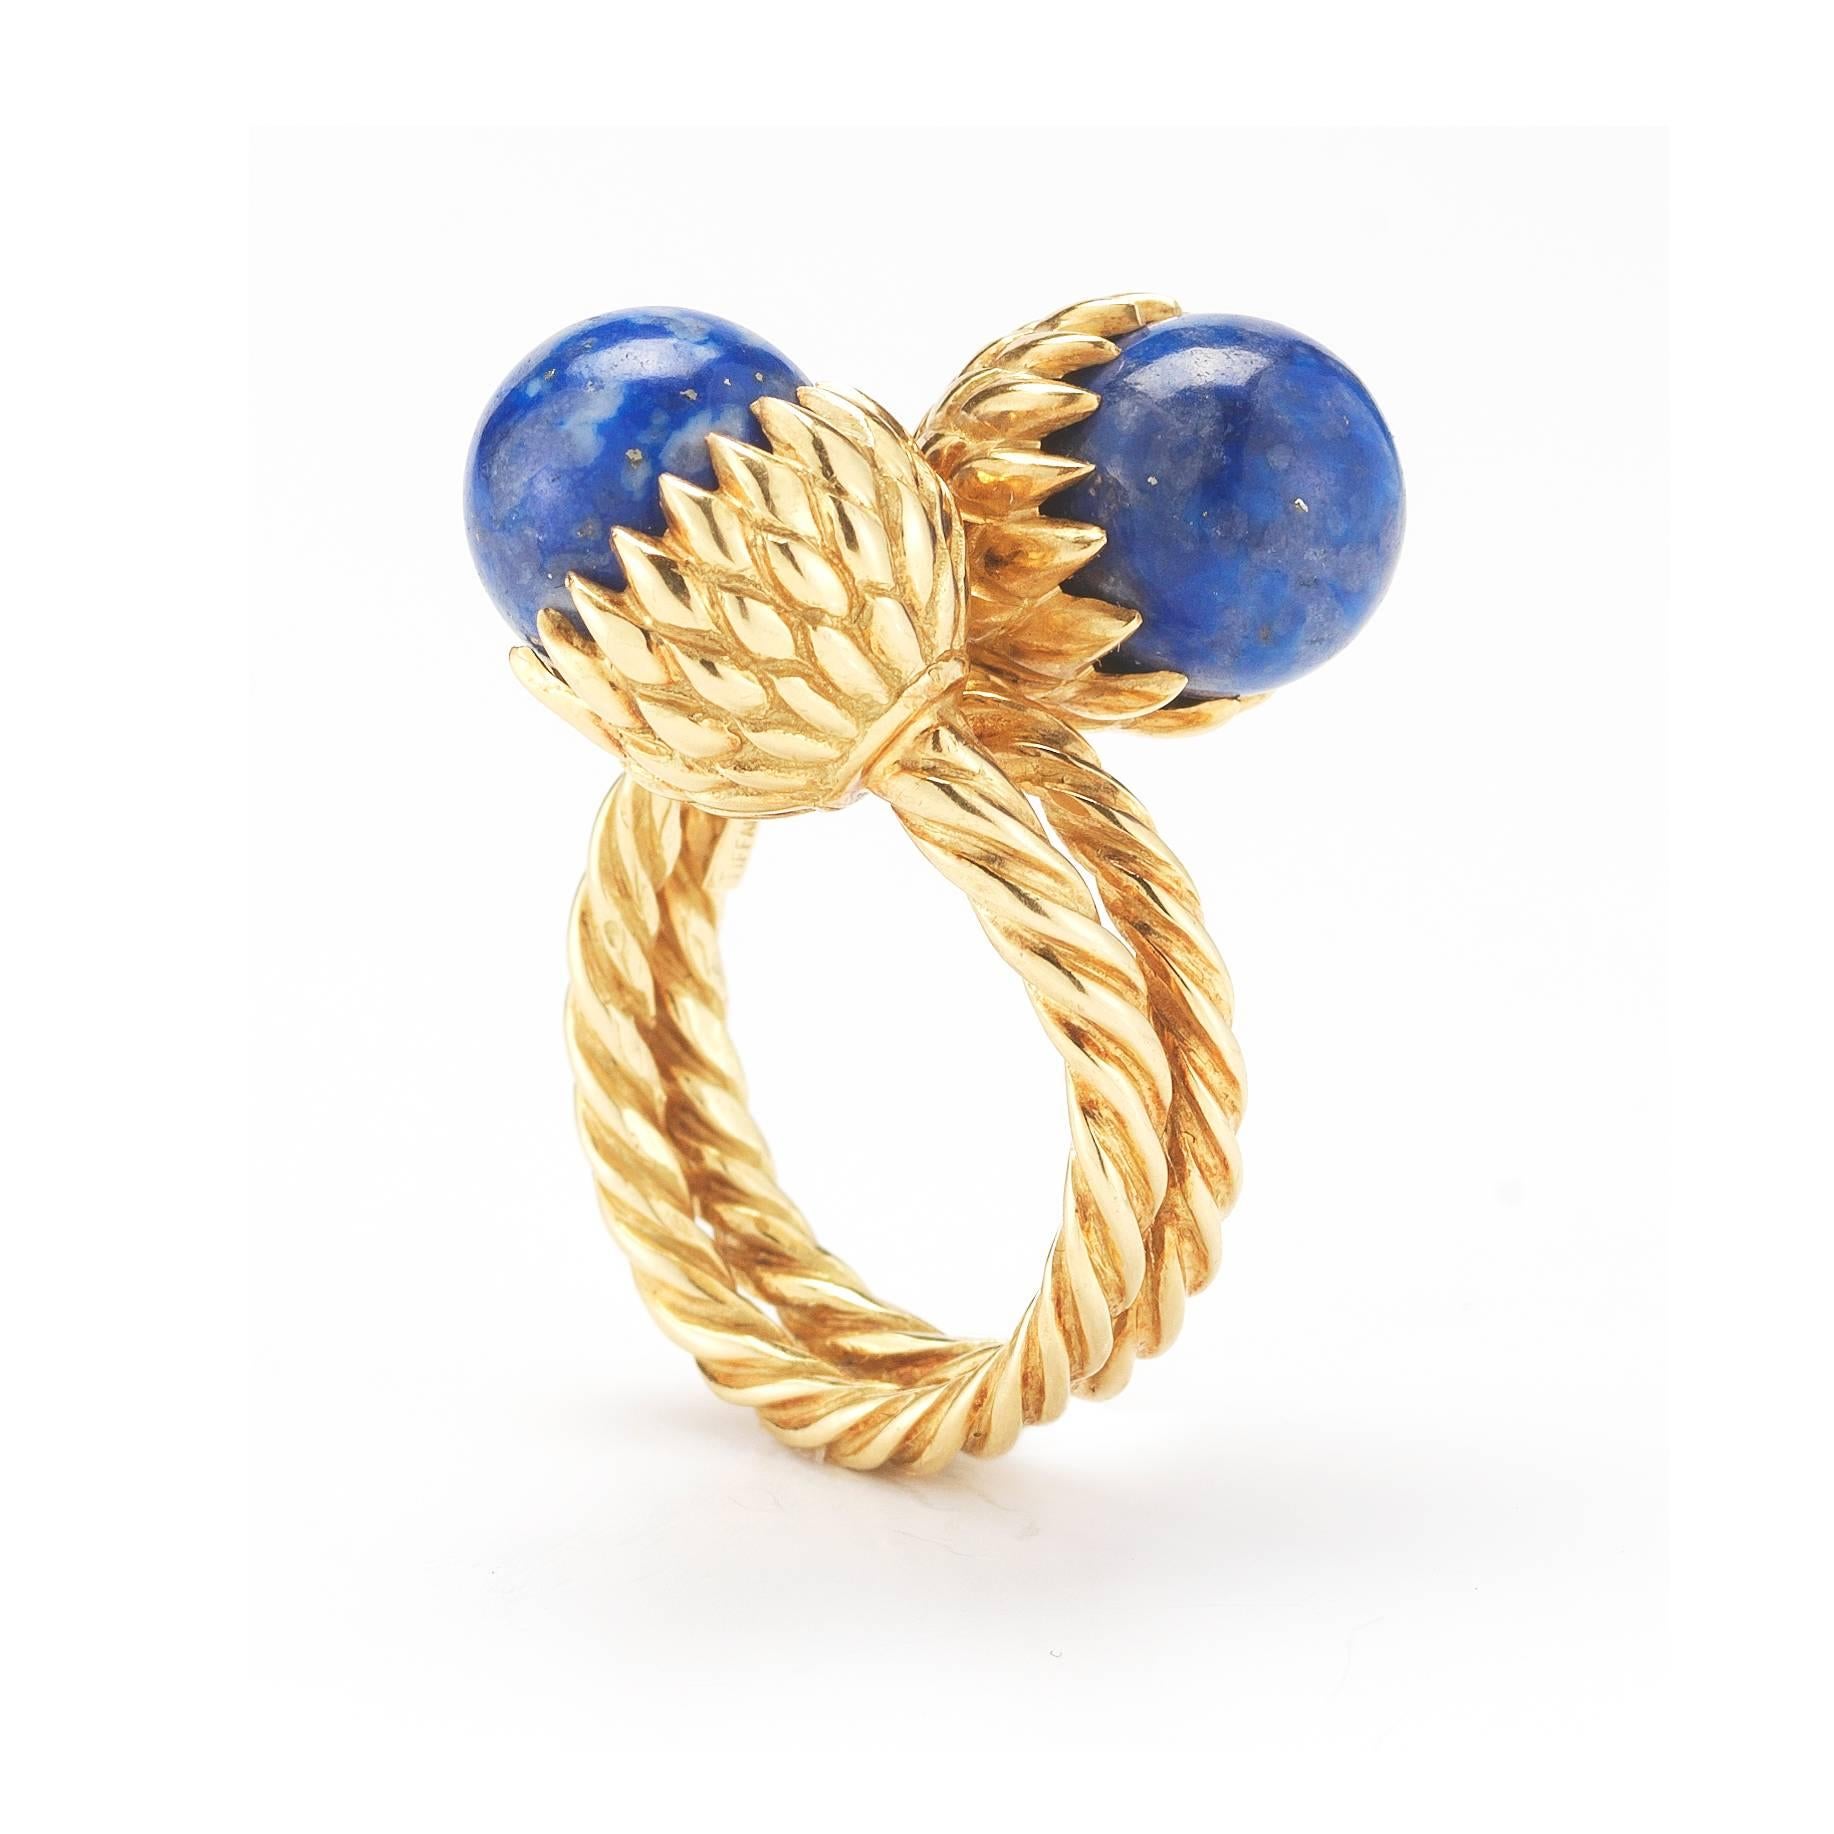 A stunning and unique ring by Tiffany & Co. Set in 18k Yellow Gold, the lapis stones bypass one another in this Schlumberger Acorn ring. Size 5.5. 